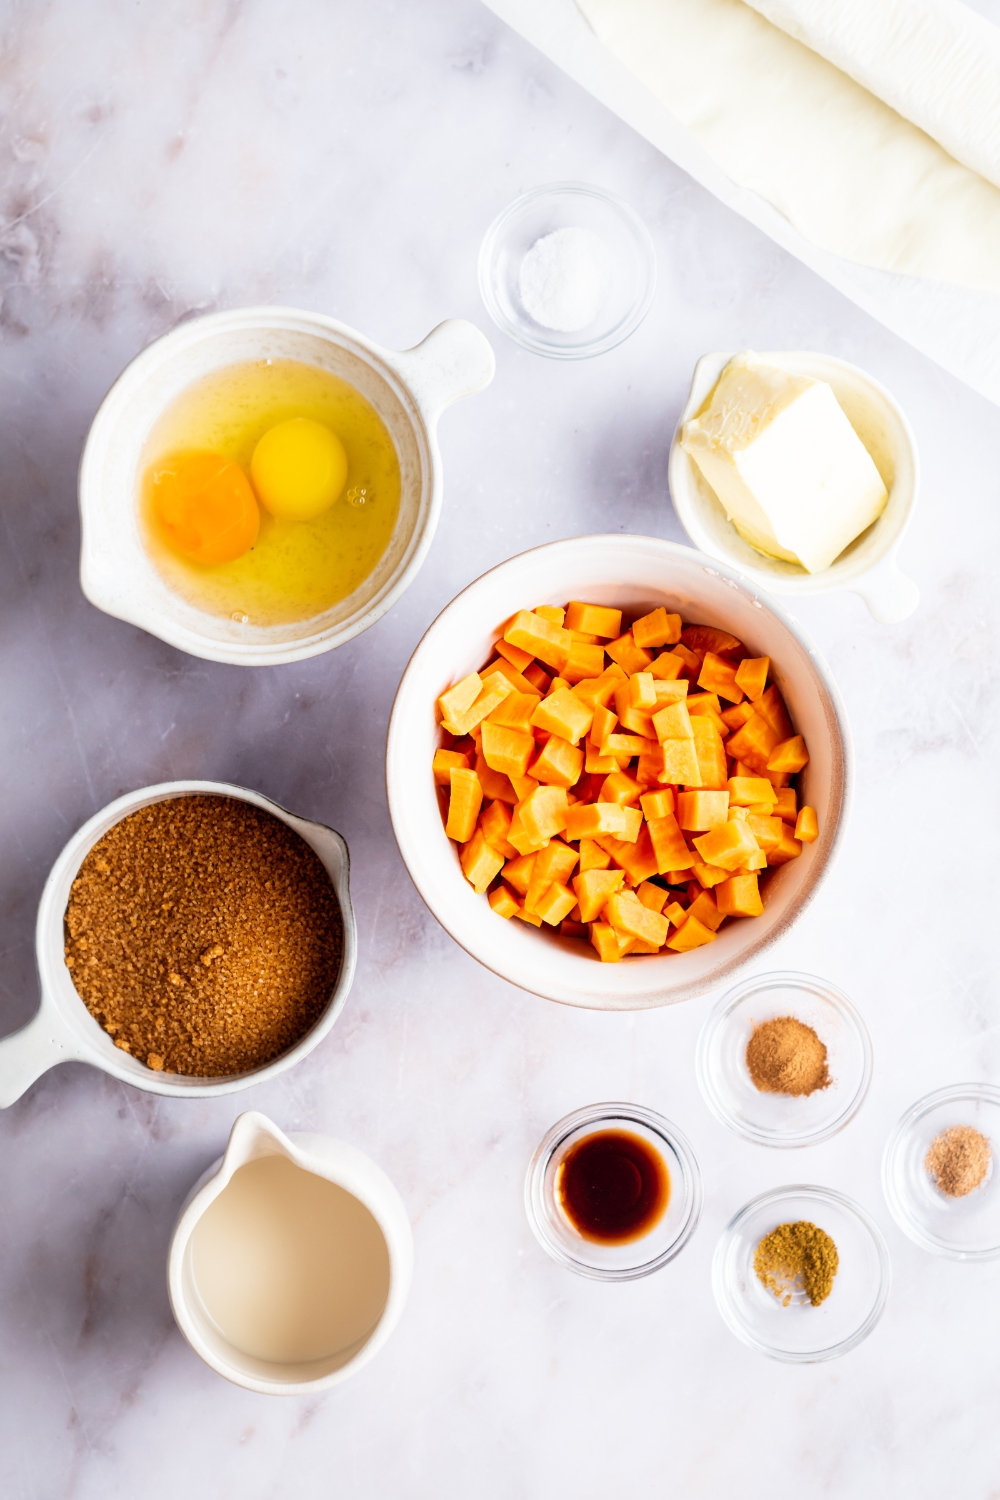 A bowl of two eggs, a cup of butter, a bowl of sweet potatoes, a bowl of brown sugar, a pitcher of milk, and small bowls of spices.